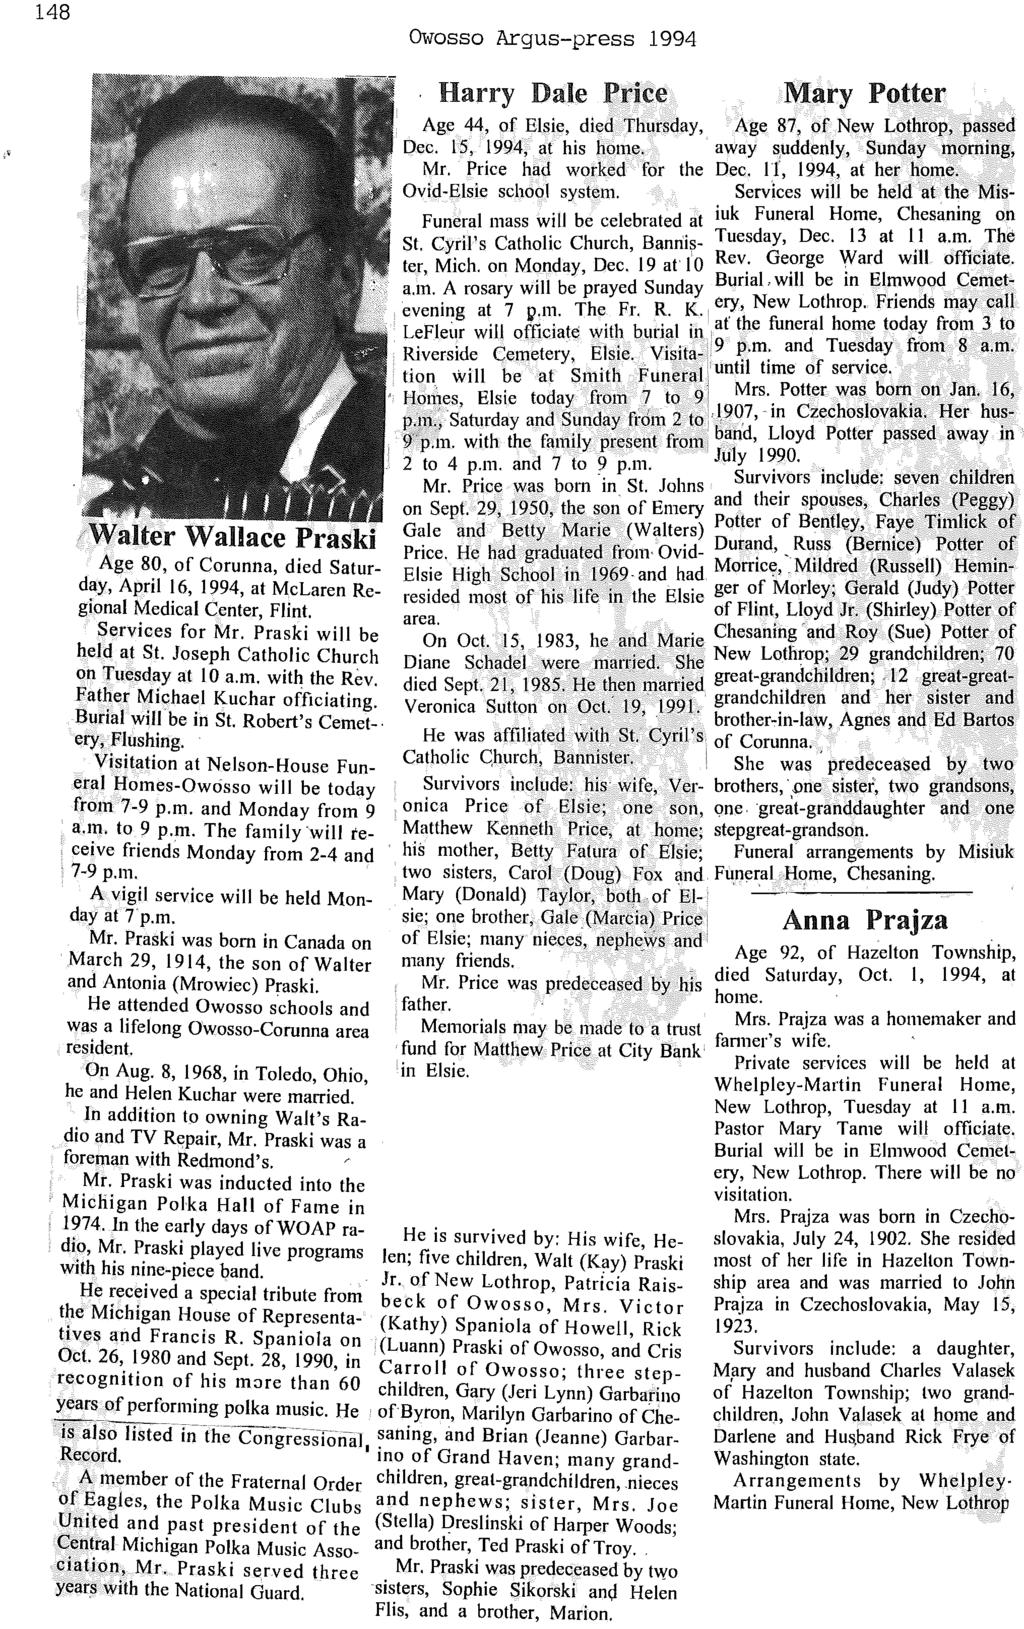 148 Owosso Argus-press 1994 / Walter Wallace Praski Age 80, of Corunna, died Saturday, April 16, 1994, at McLaren Regional Medical Center, Flint. Services for Mr. Praski will be held at St.